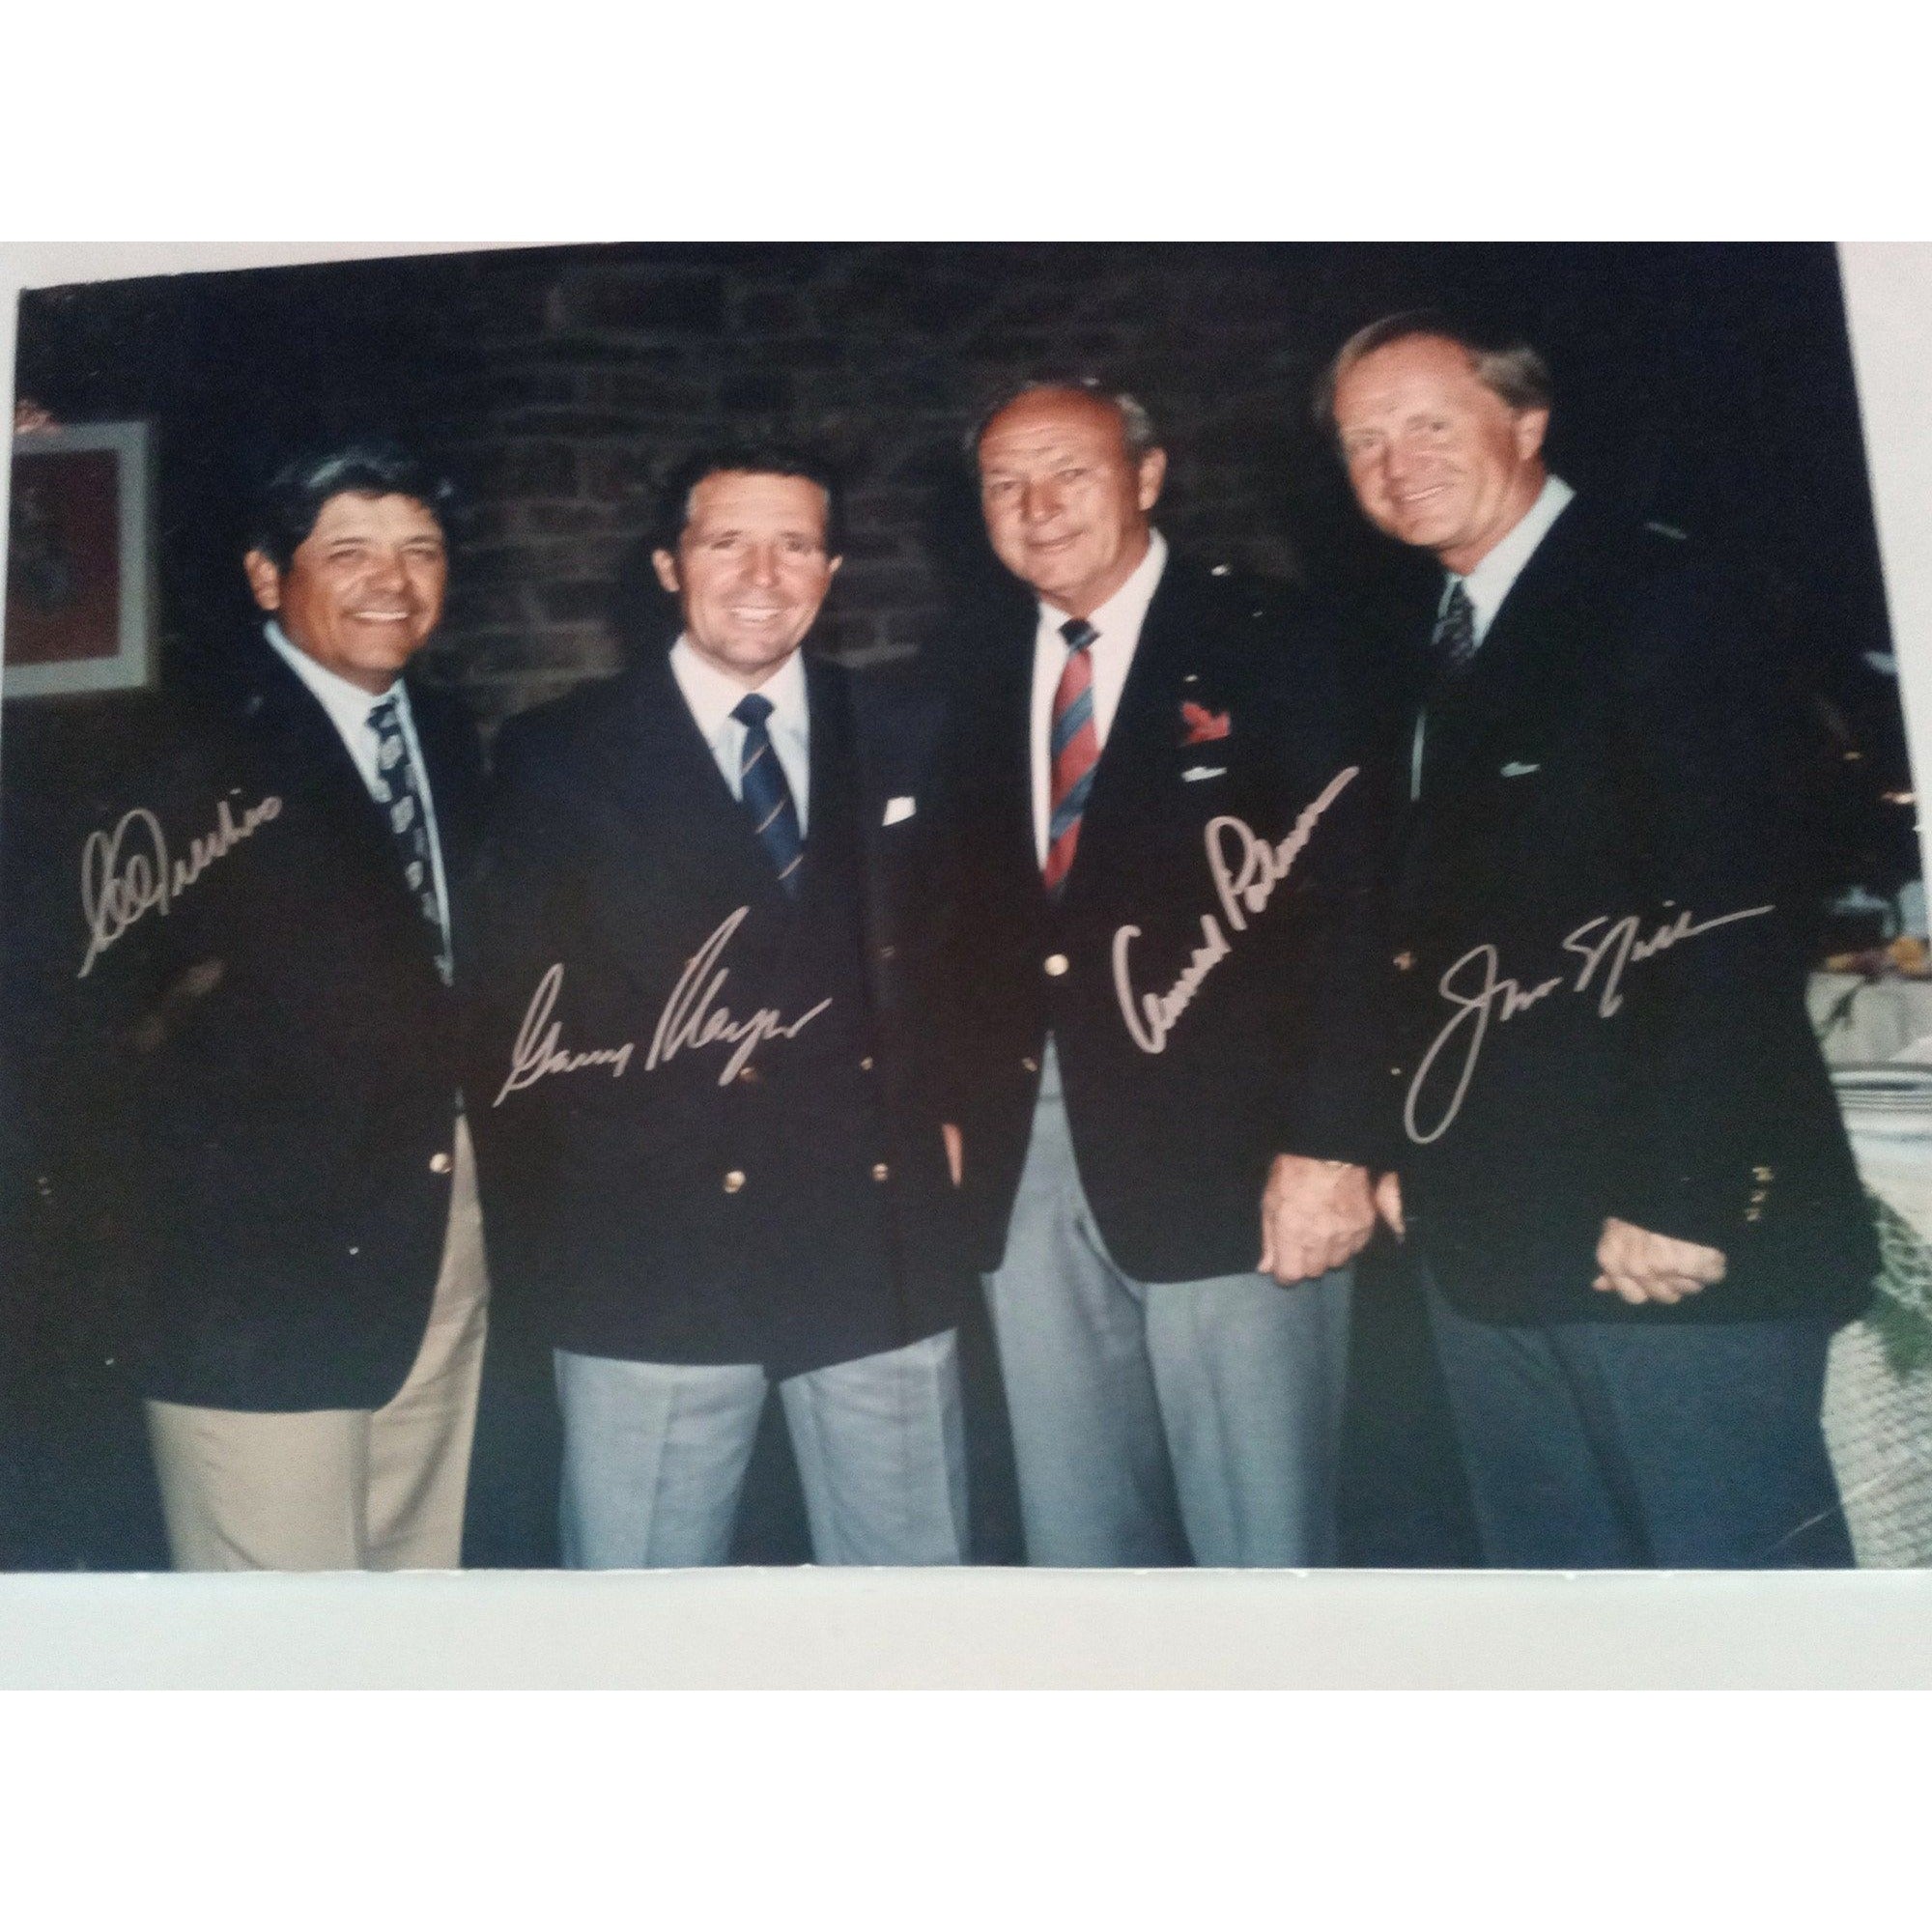 Jack Nicklaus, Arnold Palmer, Lee Trevino and Gary Player 16 x 20 with proof